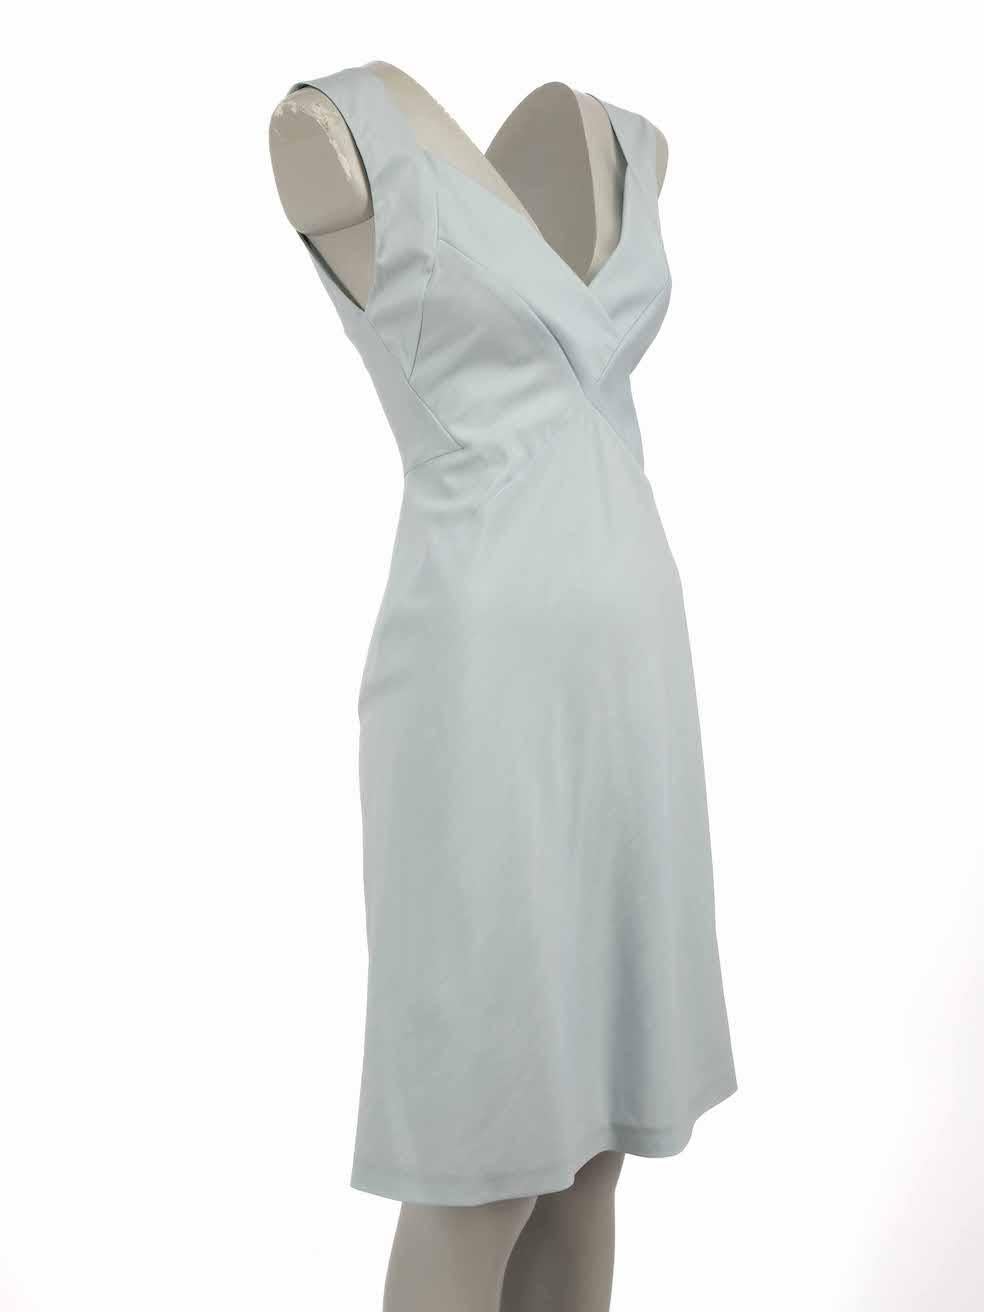 CONDITION is Very good. Hardly any visible wear to dress is evident on this used Narciso Rodriguez designer resale item.
 
Details
Blue
Wool 
Knee length dress 
V neckline 
Sleeveless 
Back zip closure with hook and eye

Made in Italy
  
Composition